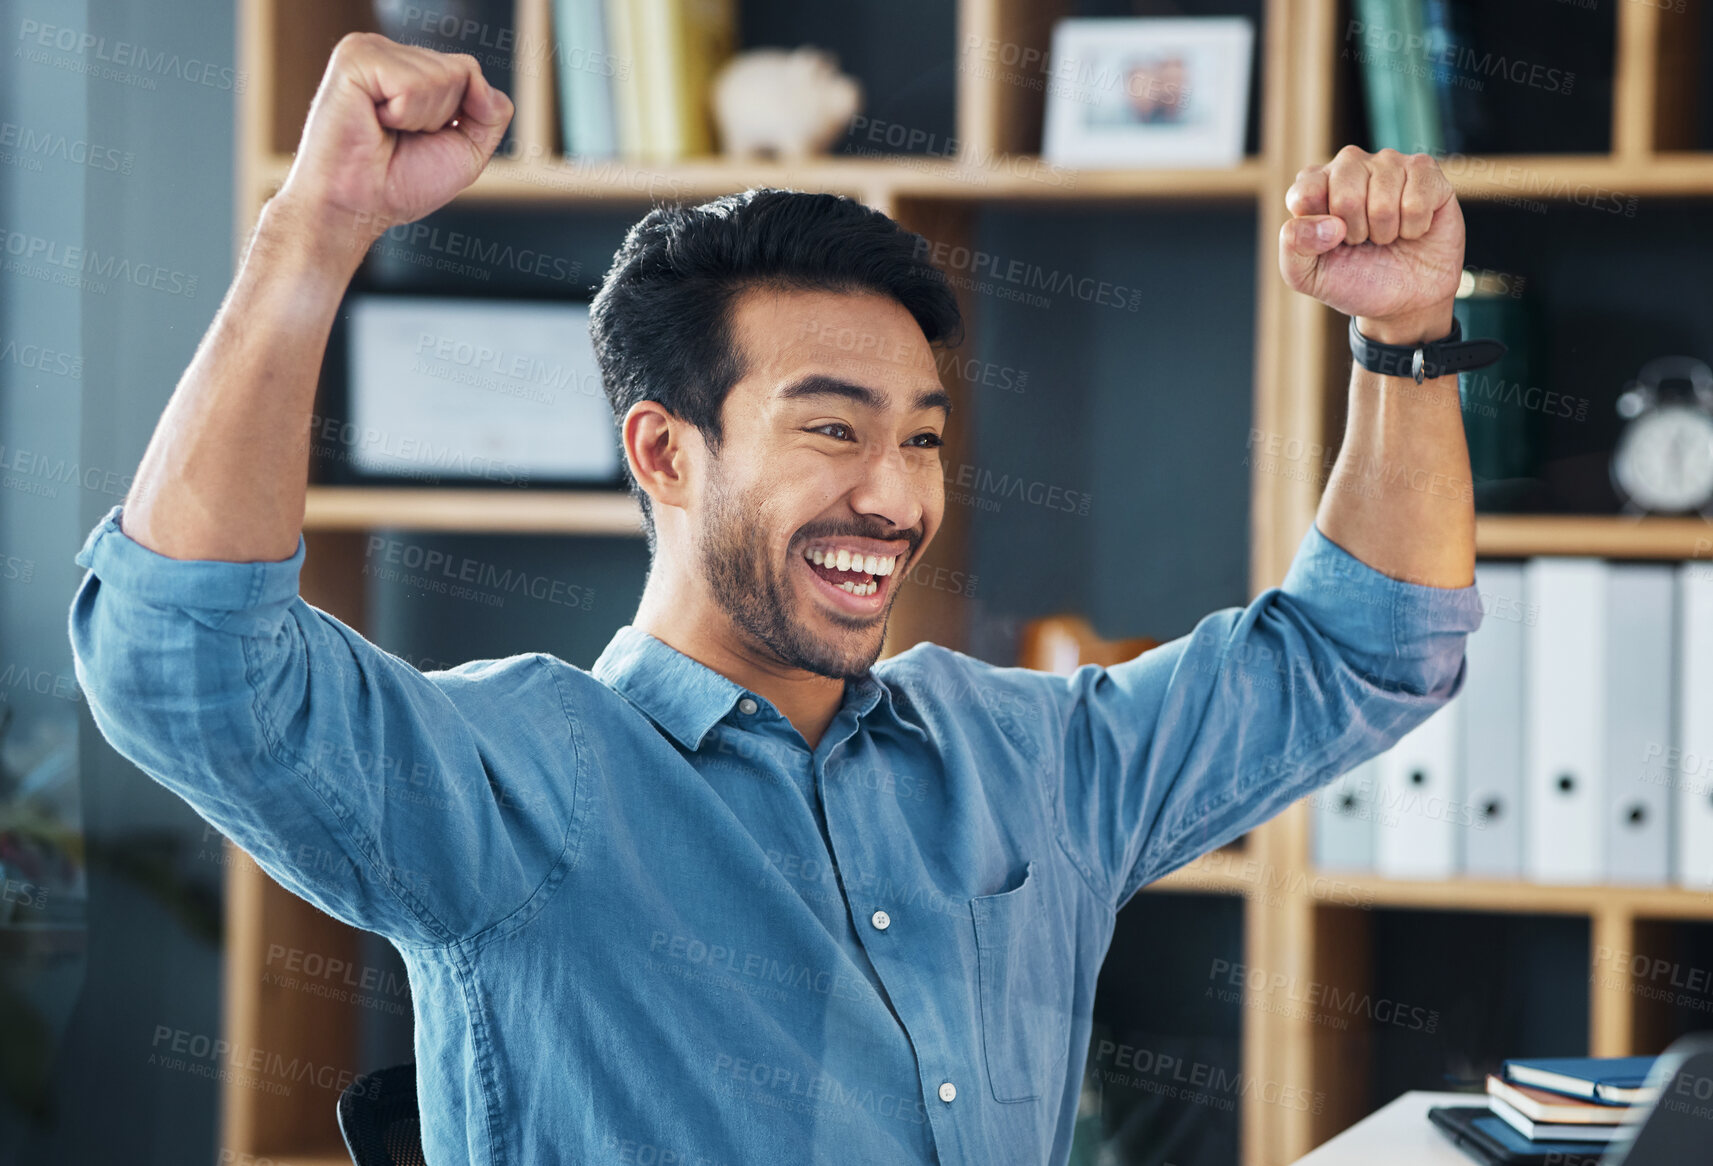 Buy stock photo Yes, winner and business man in office celebration for career opportunity, bonus or winning competition. Happy Asian person, worker or professional success, fist pump and celebrate promotion or news